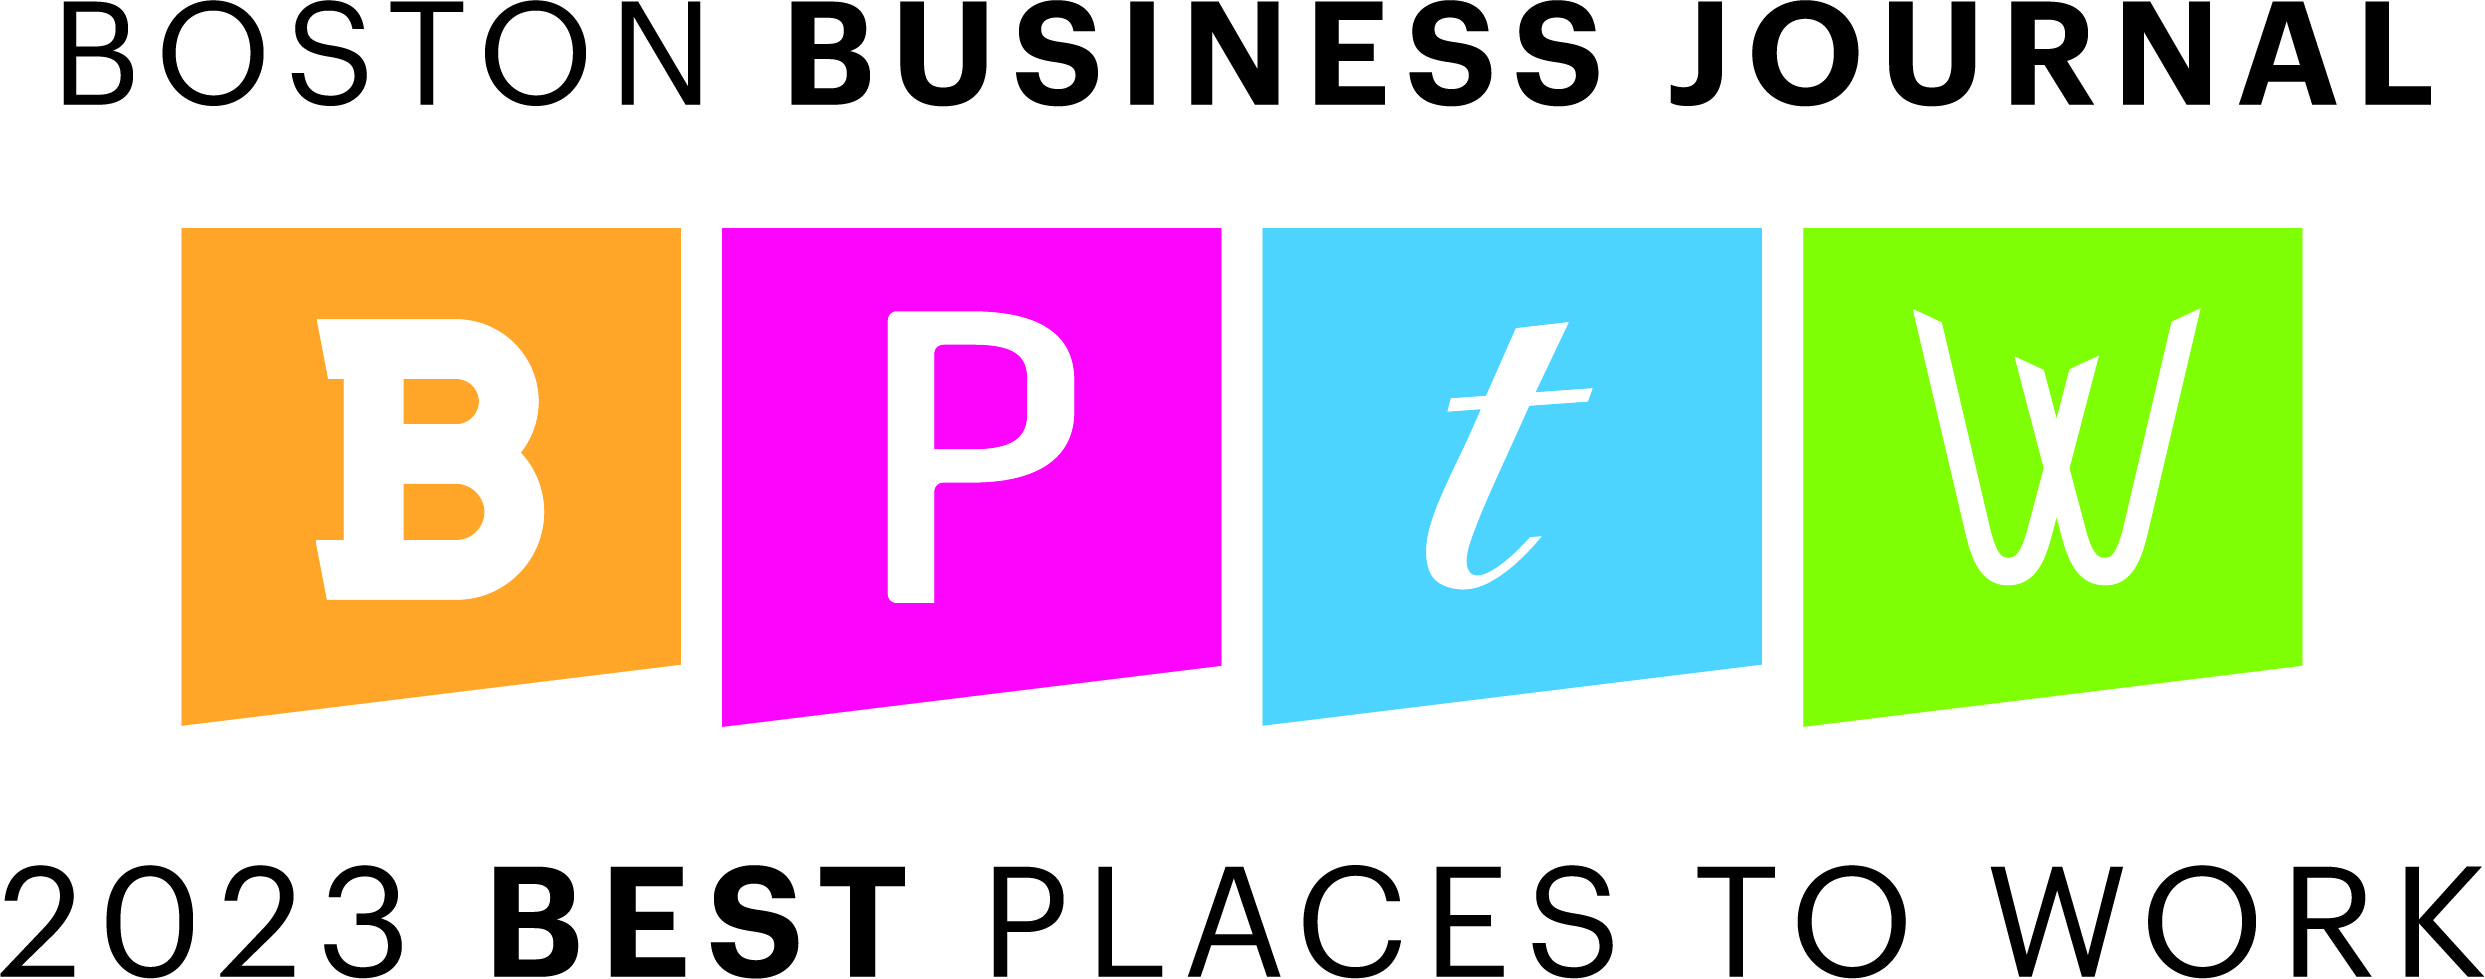 Boston Business Journal 2023 Best Places to Work